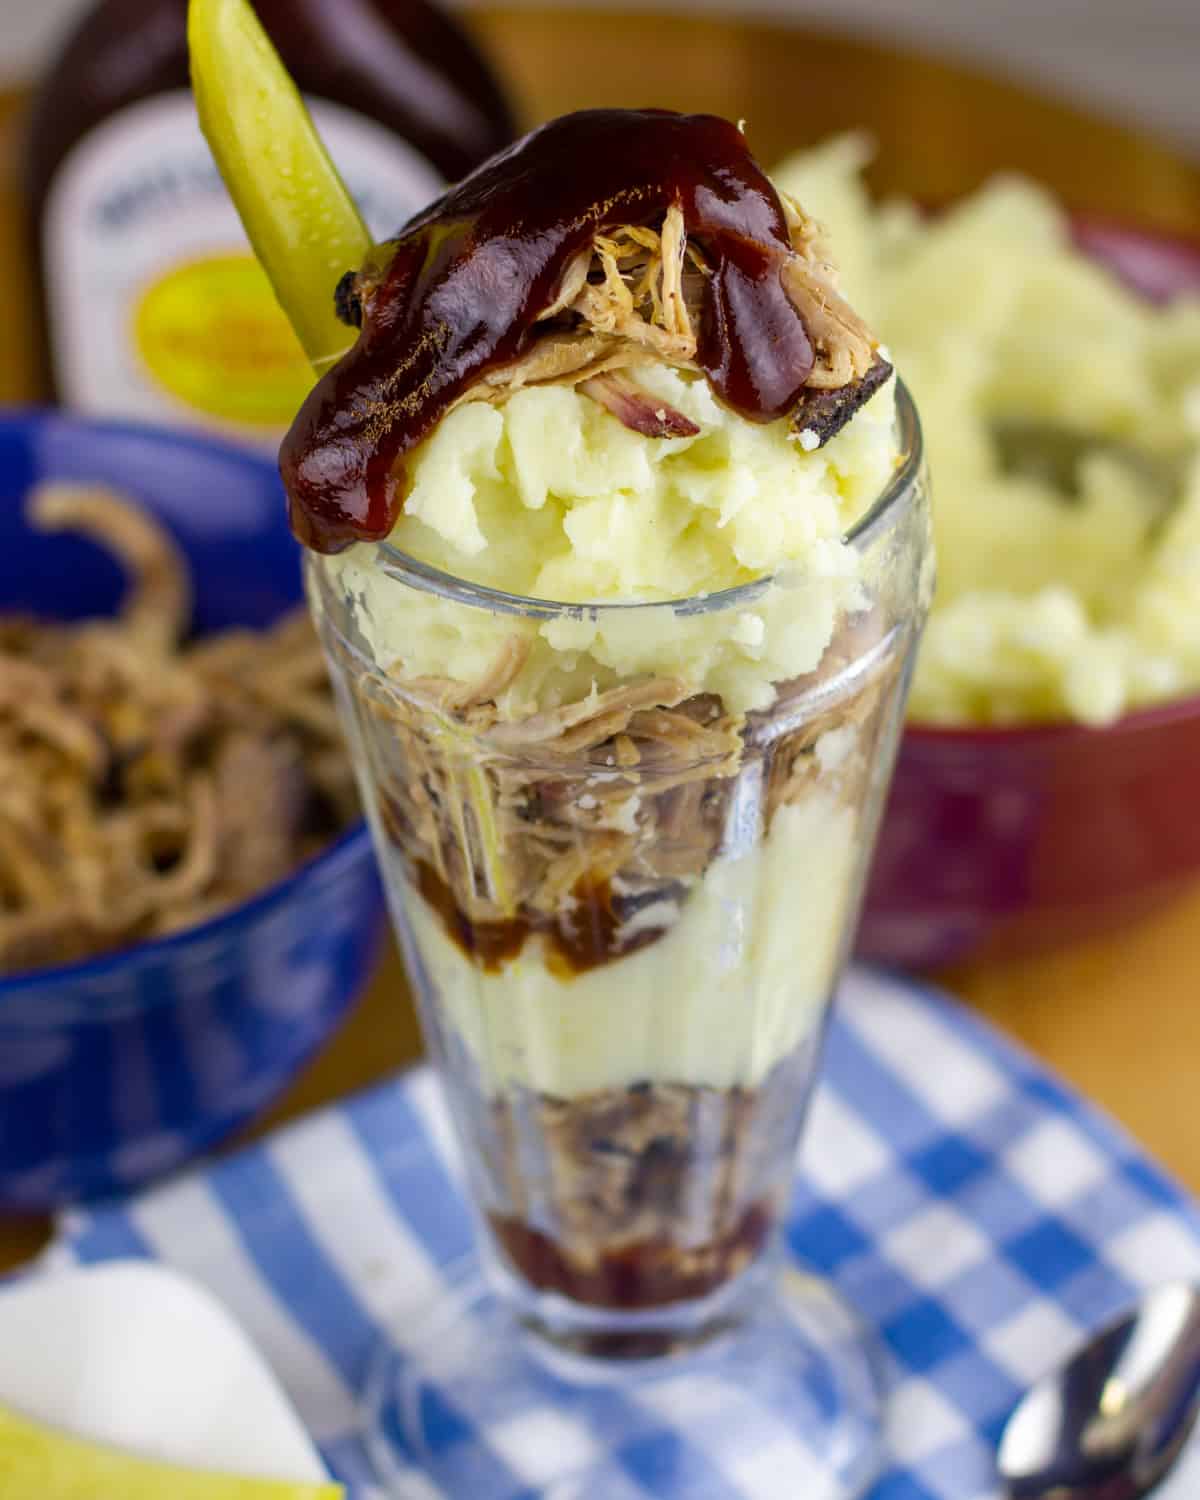 BBQ sauce drizzled on top of a pulled pork parfait.